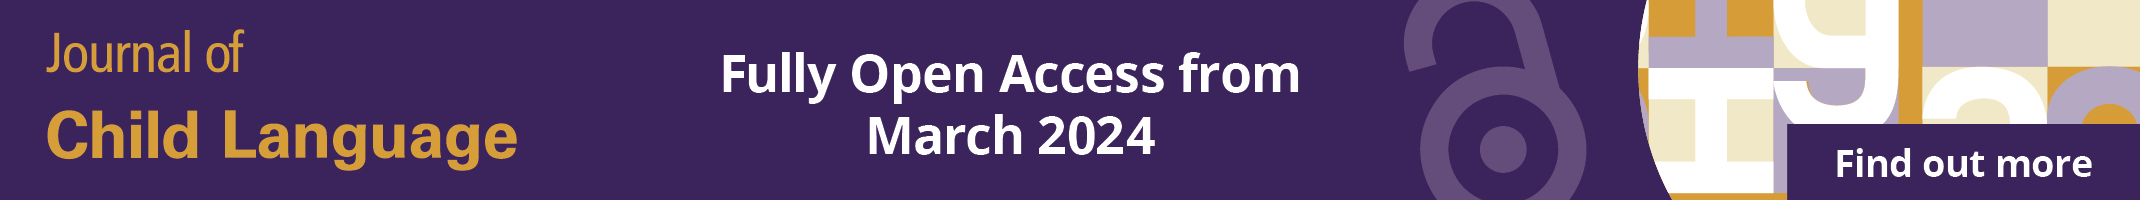 Banner about JCL flip to open access in 2024